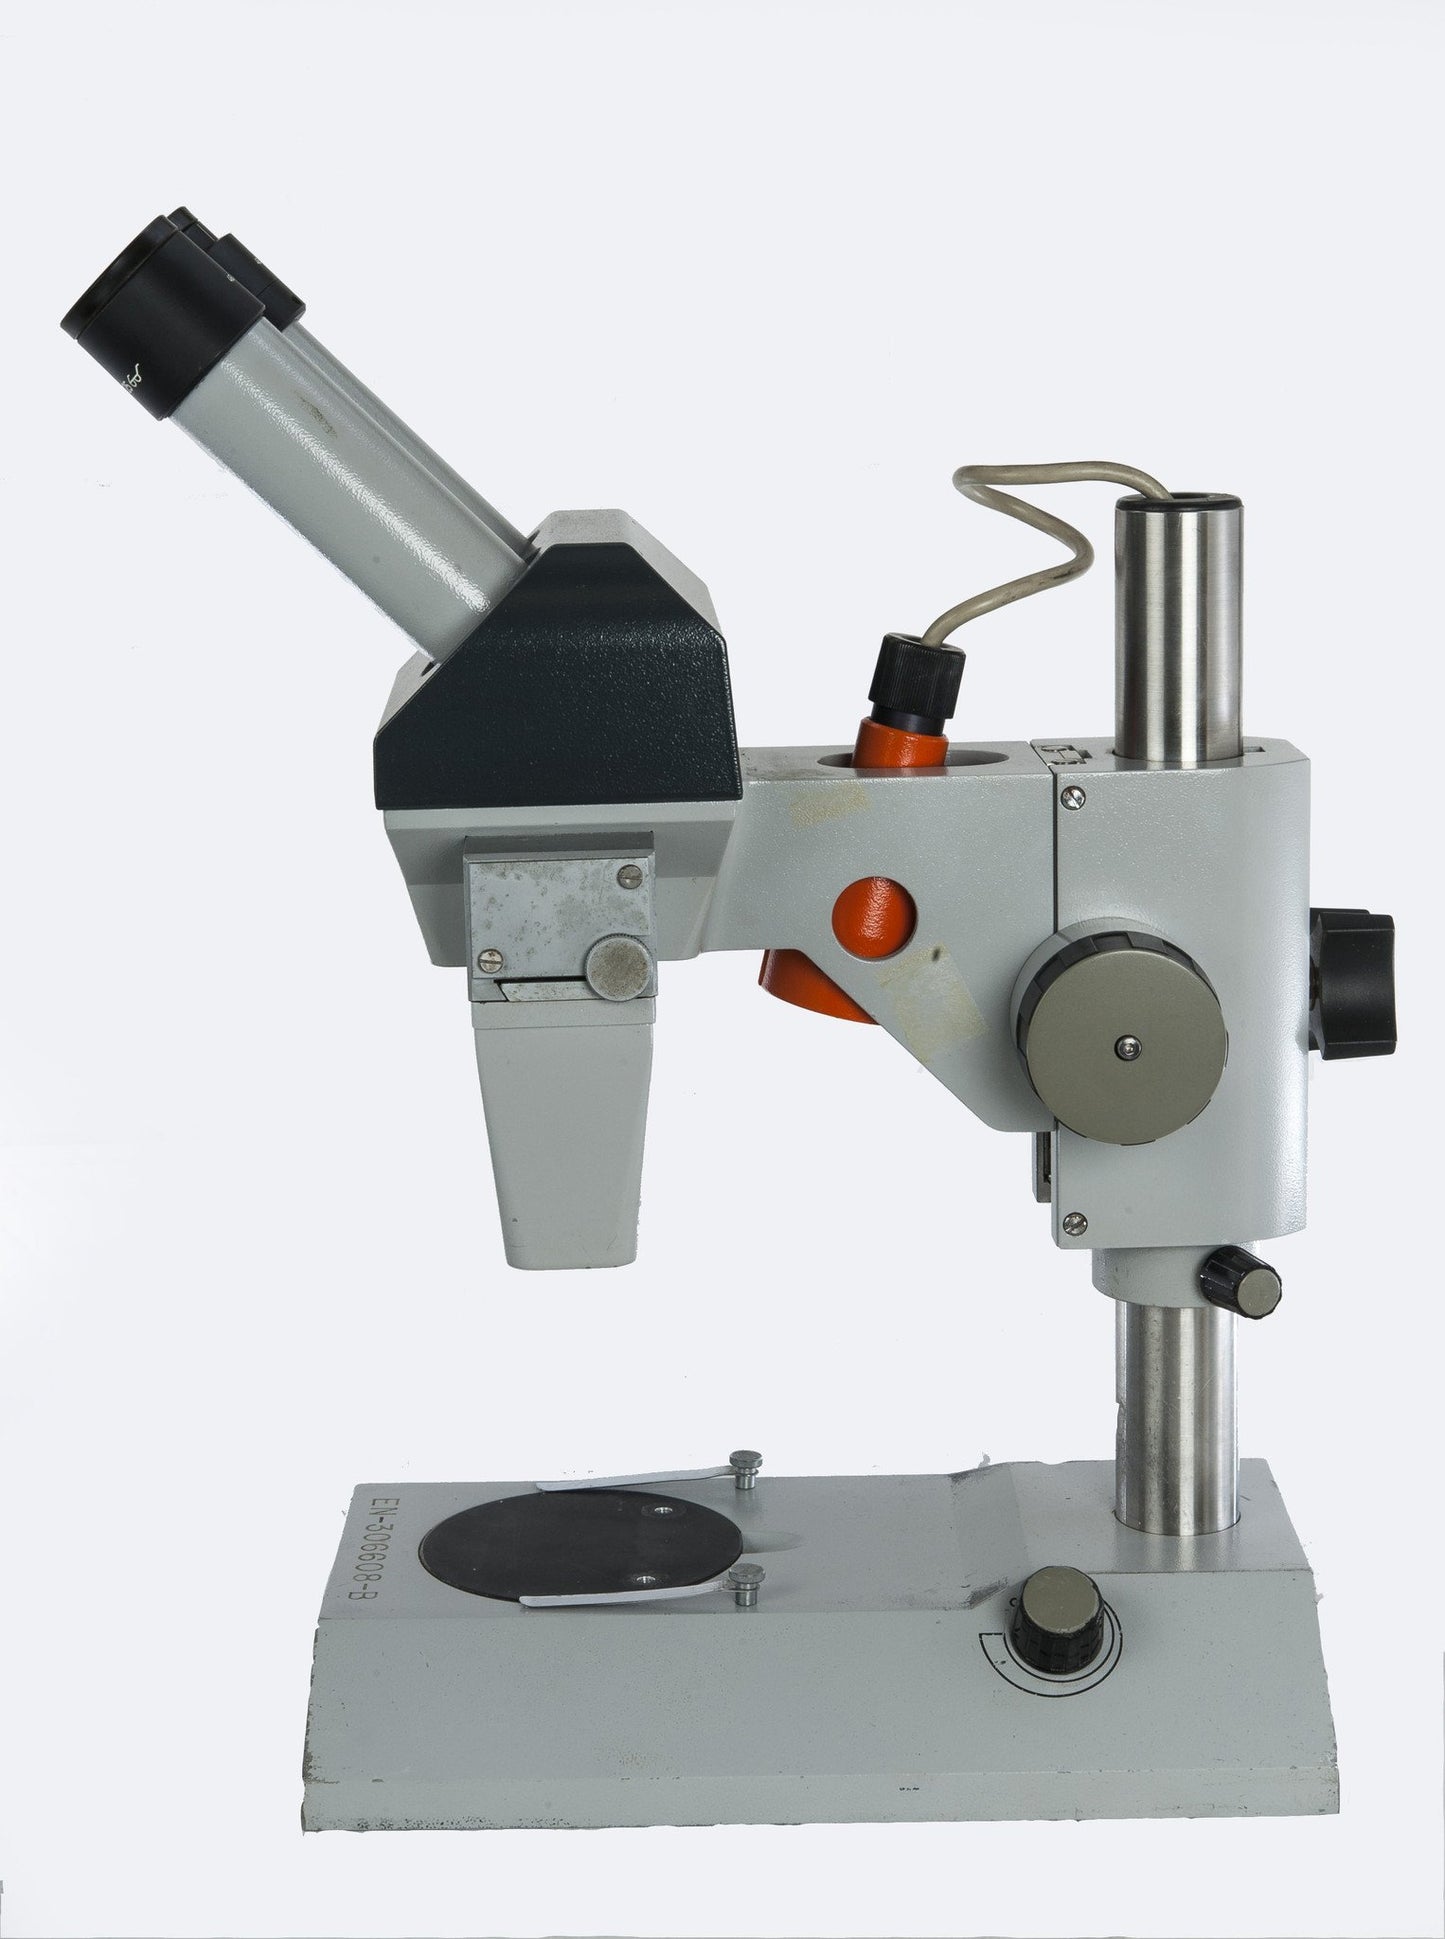 Carl Zeiss Stereo Microscope - Microscope Central
 - 4